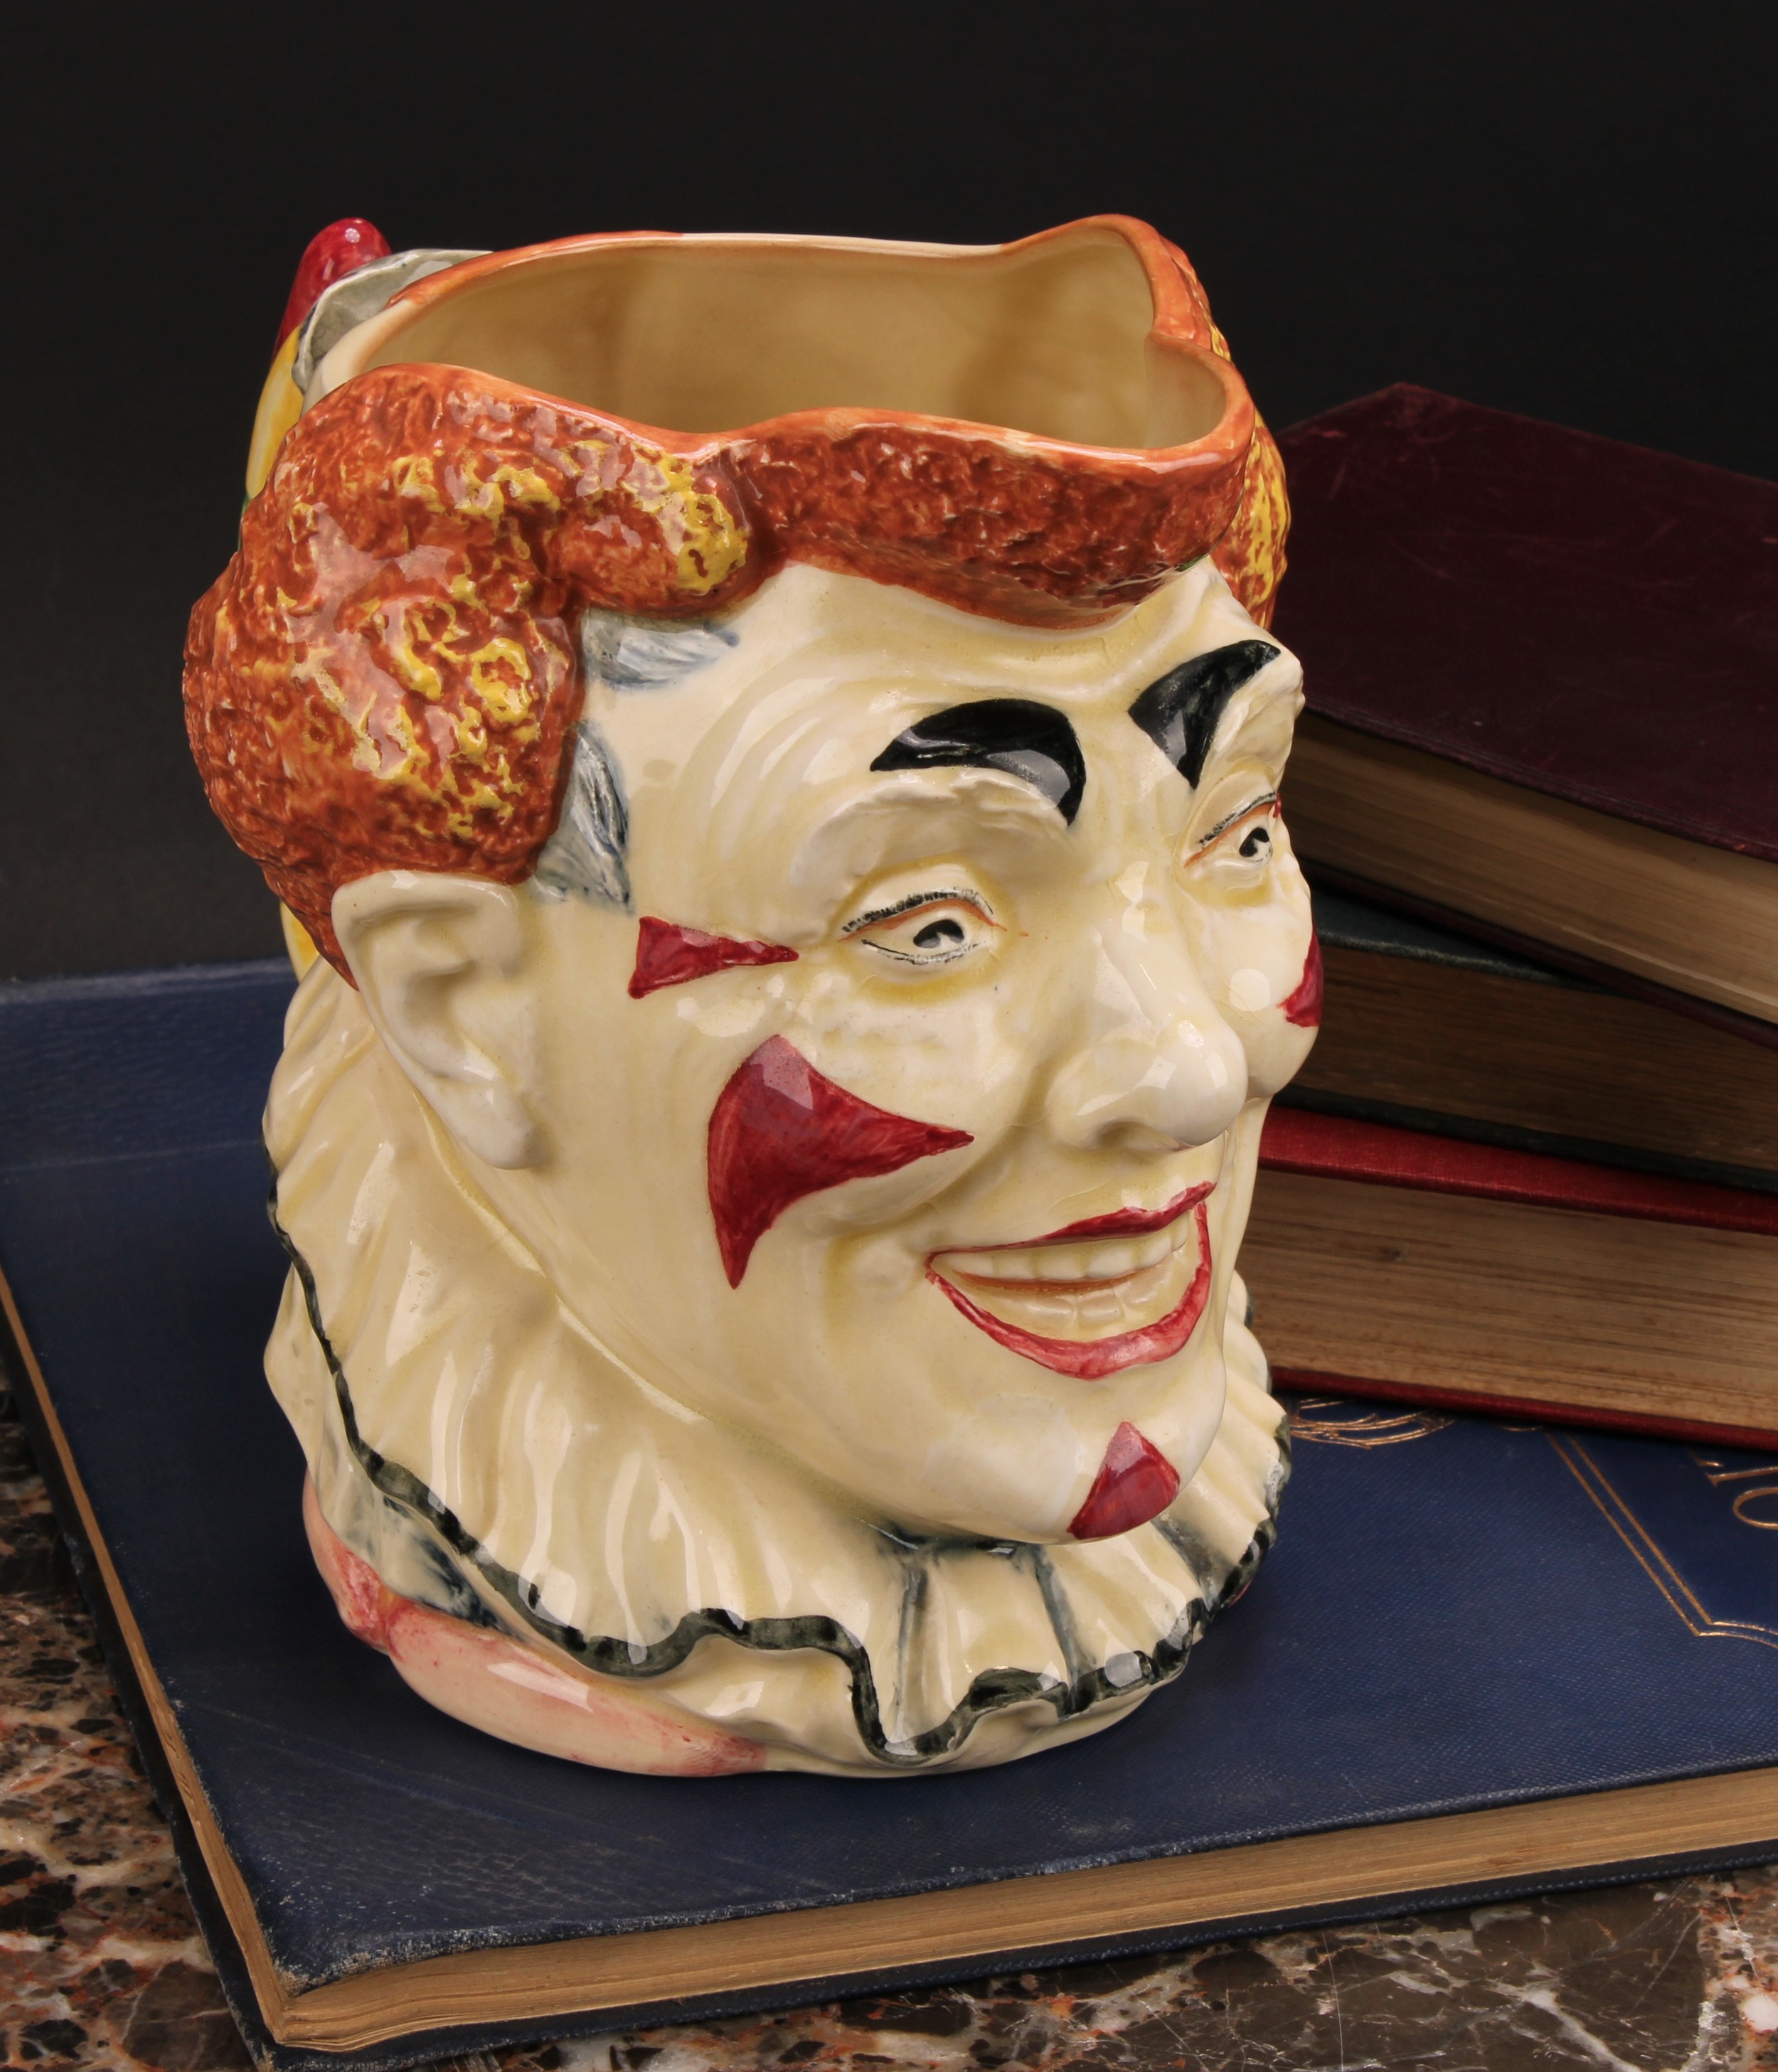 A Royal Doulton character jug, The Clown, designed by H. Fenton, decorated in polychrome with red